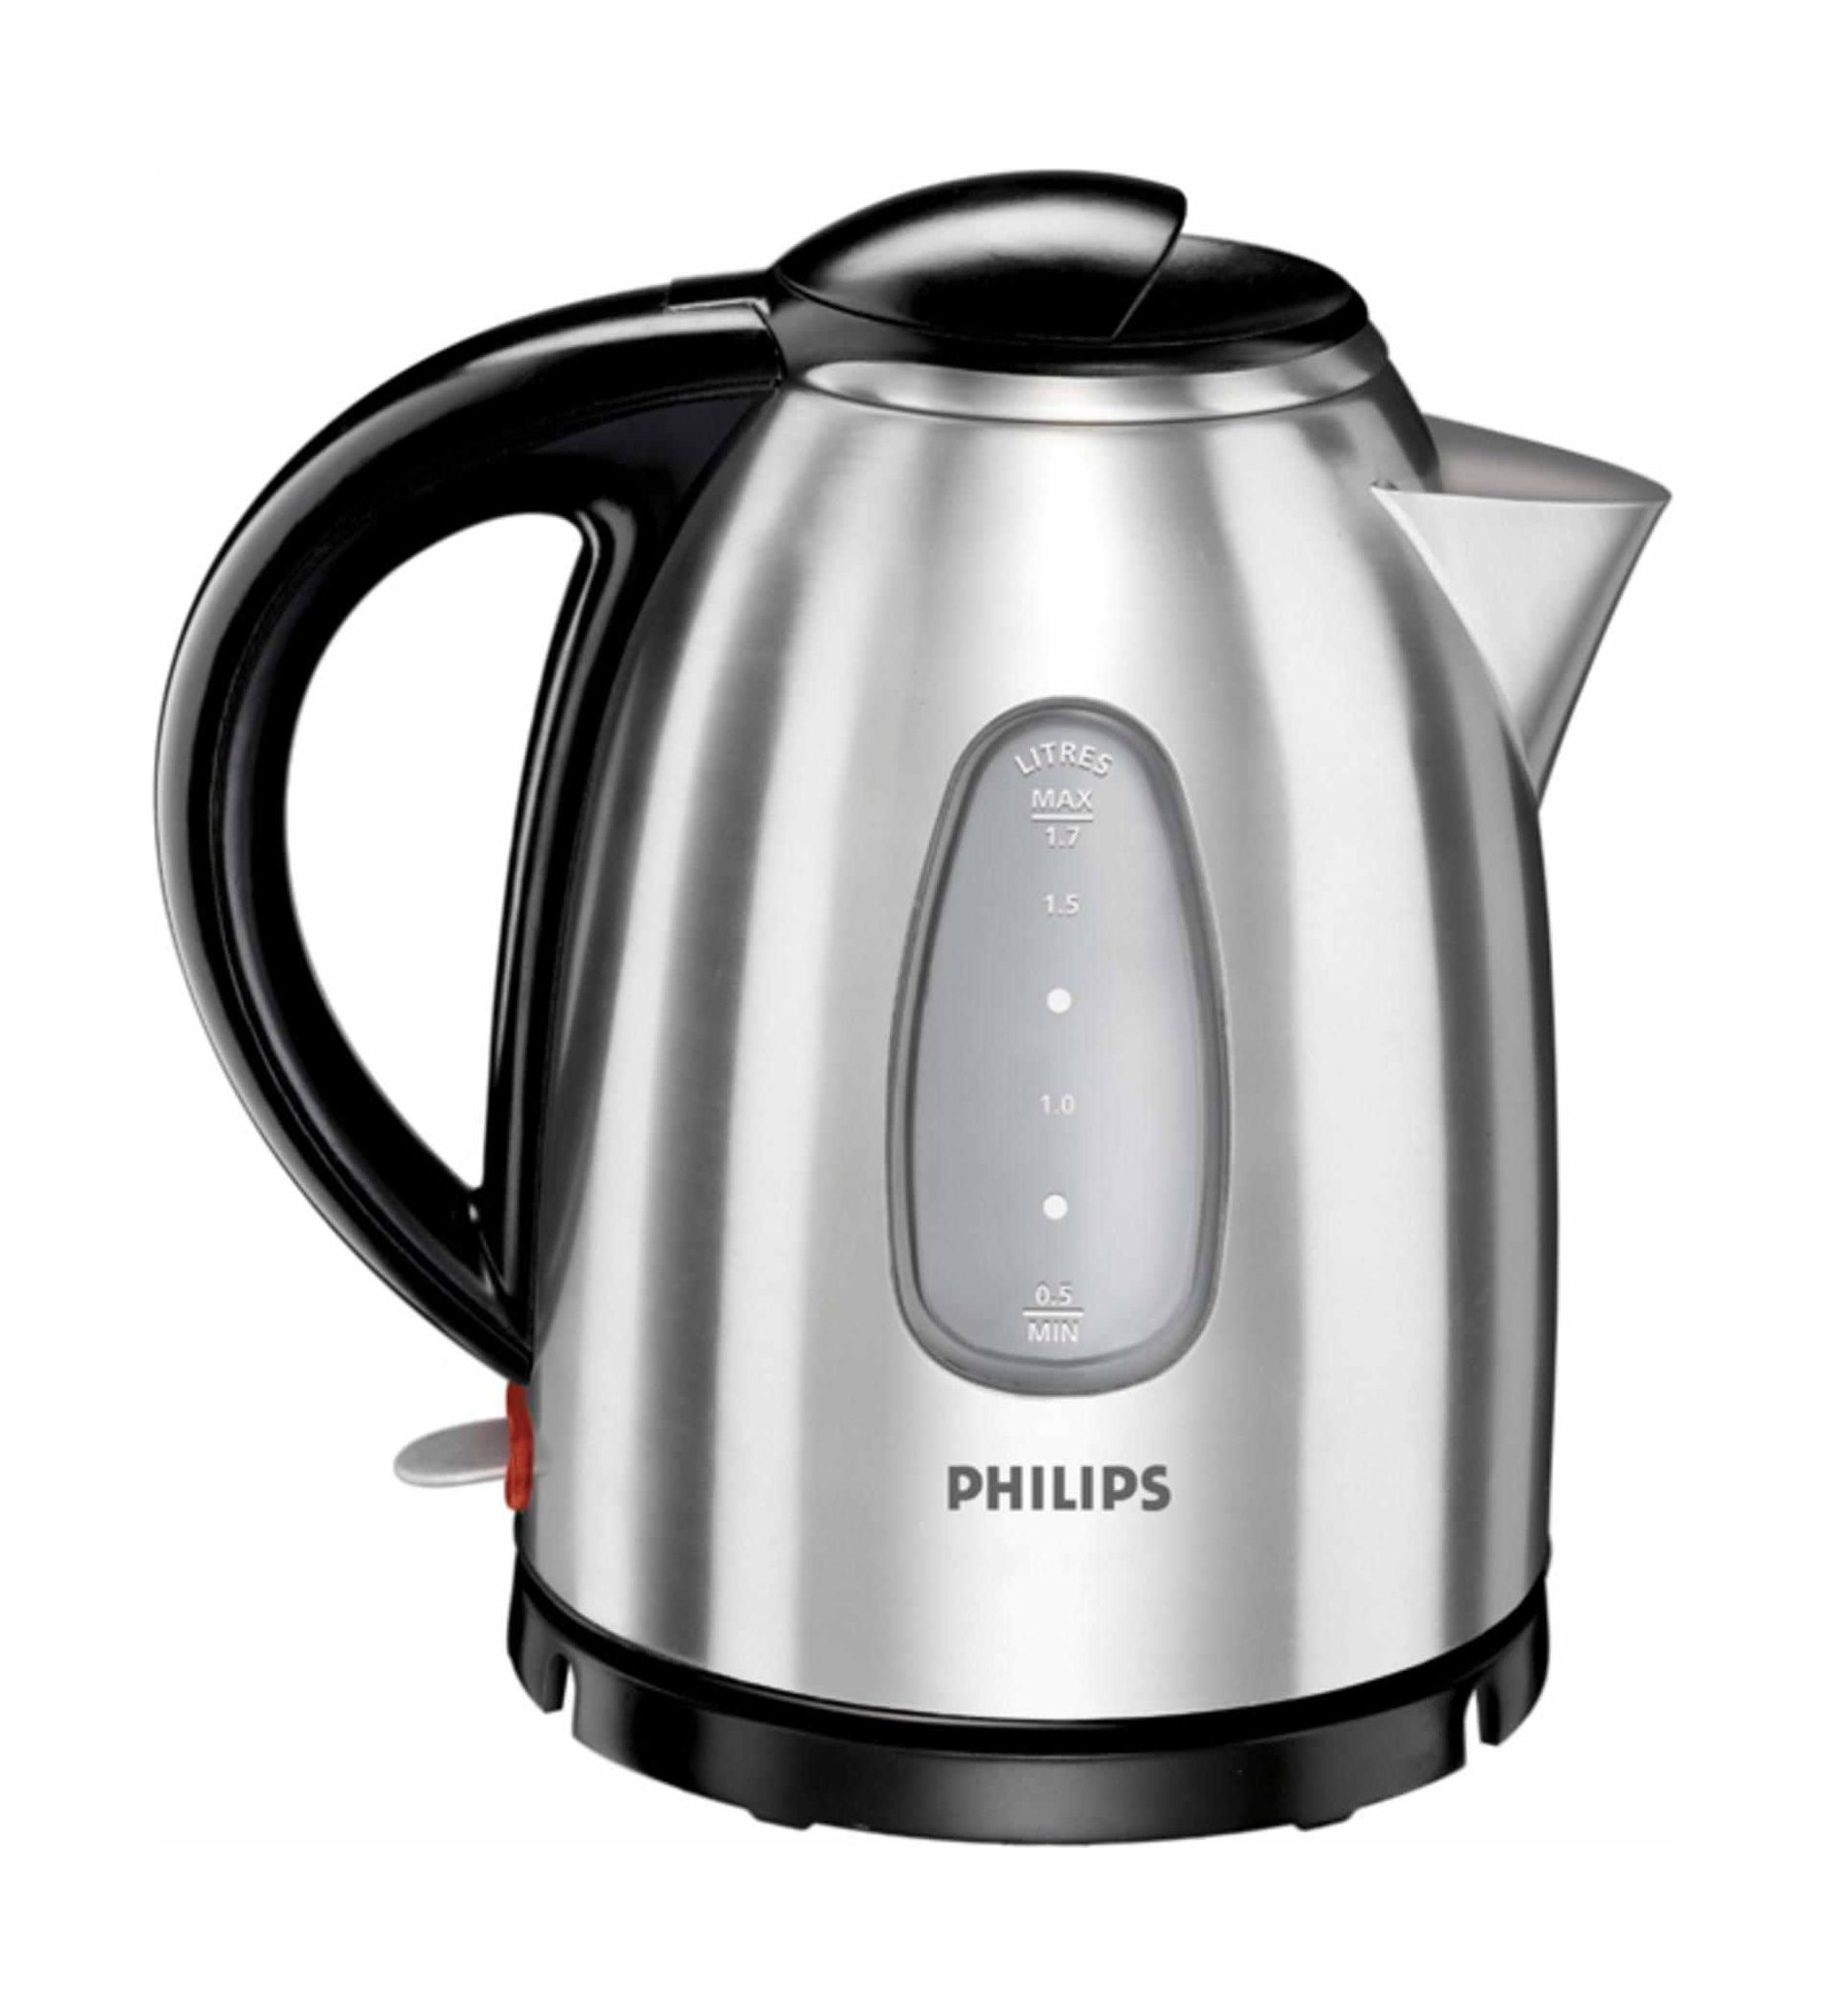 Philips Kettle 2400W 1.7Litres with Water level indicator - HD4665/24 ...